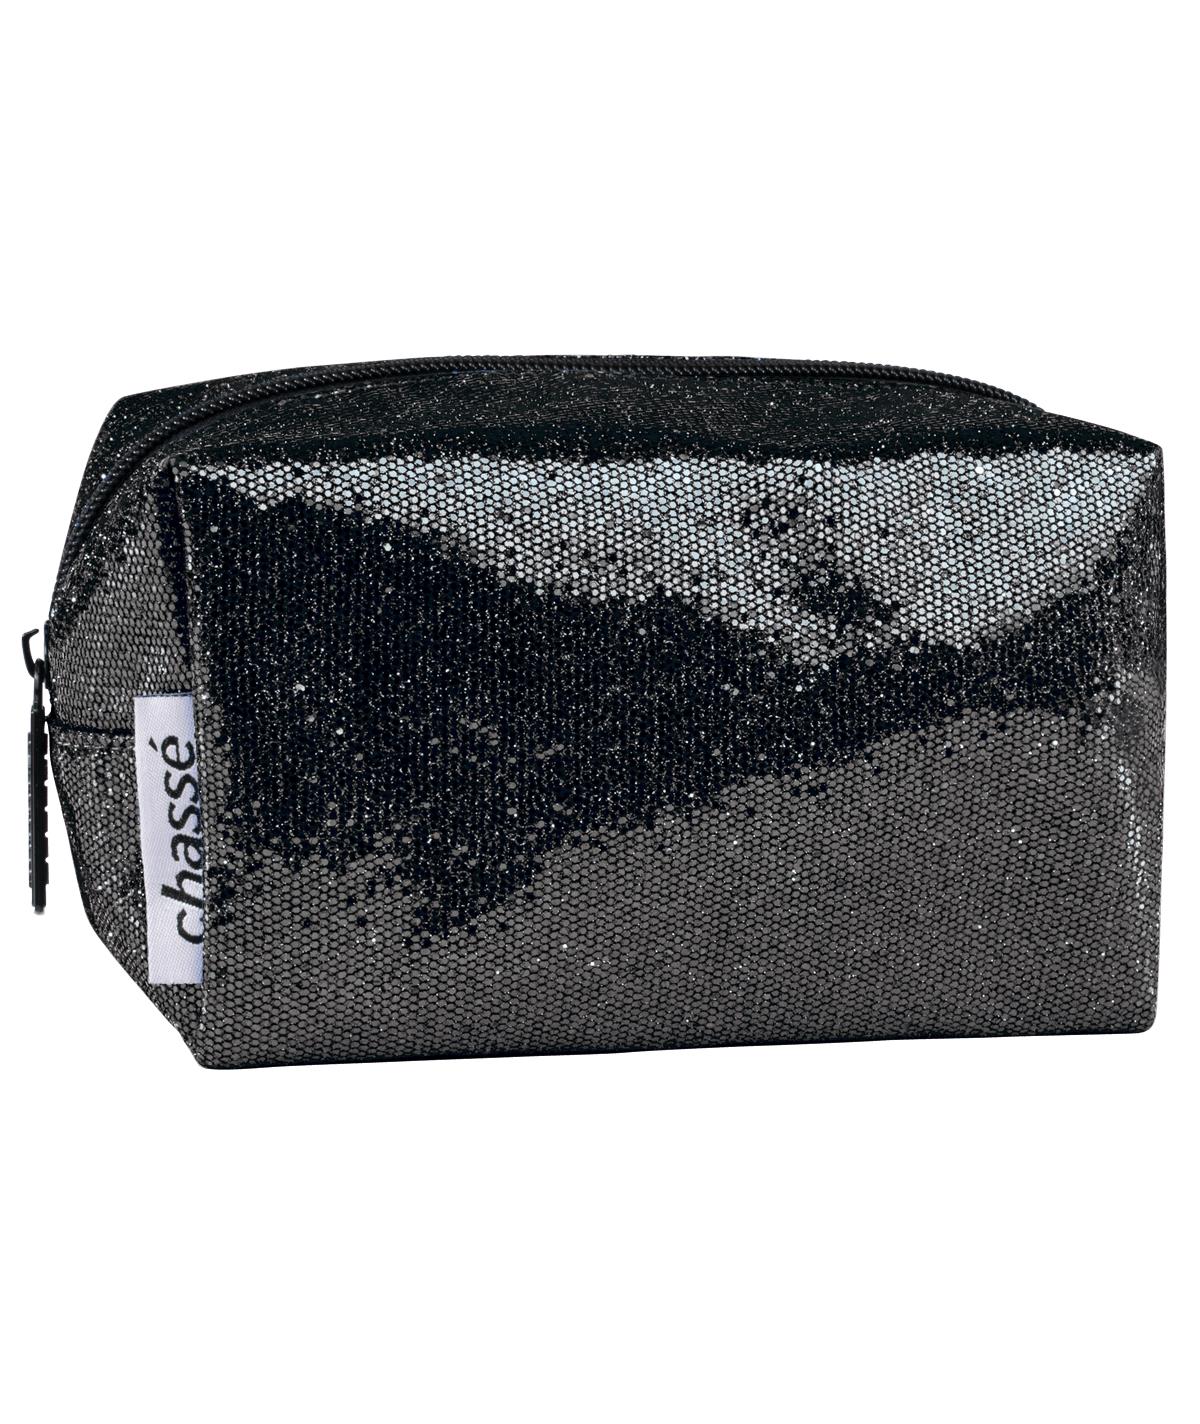 Under One Sky Glitter Cosmetic Bags for Women